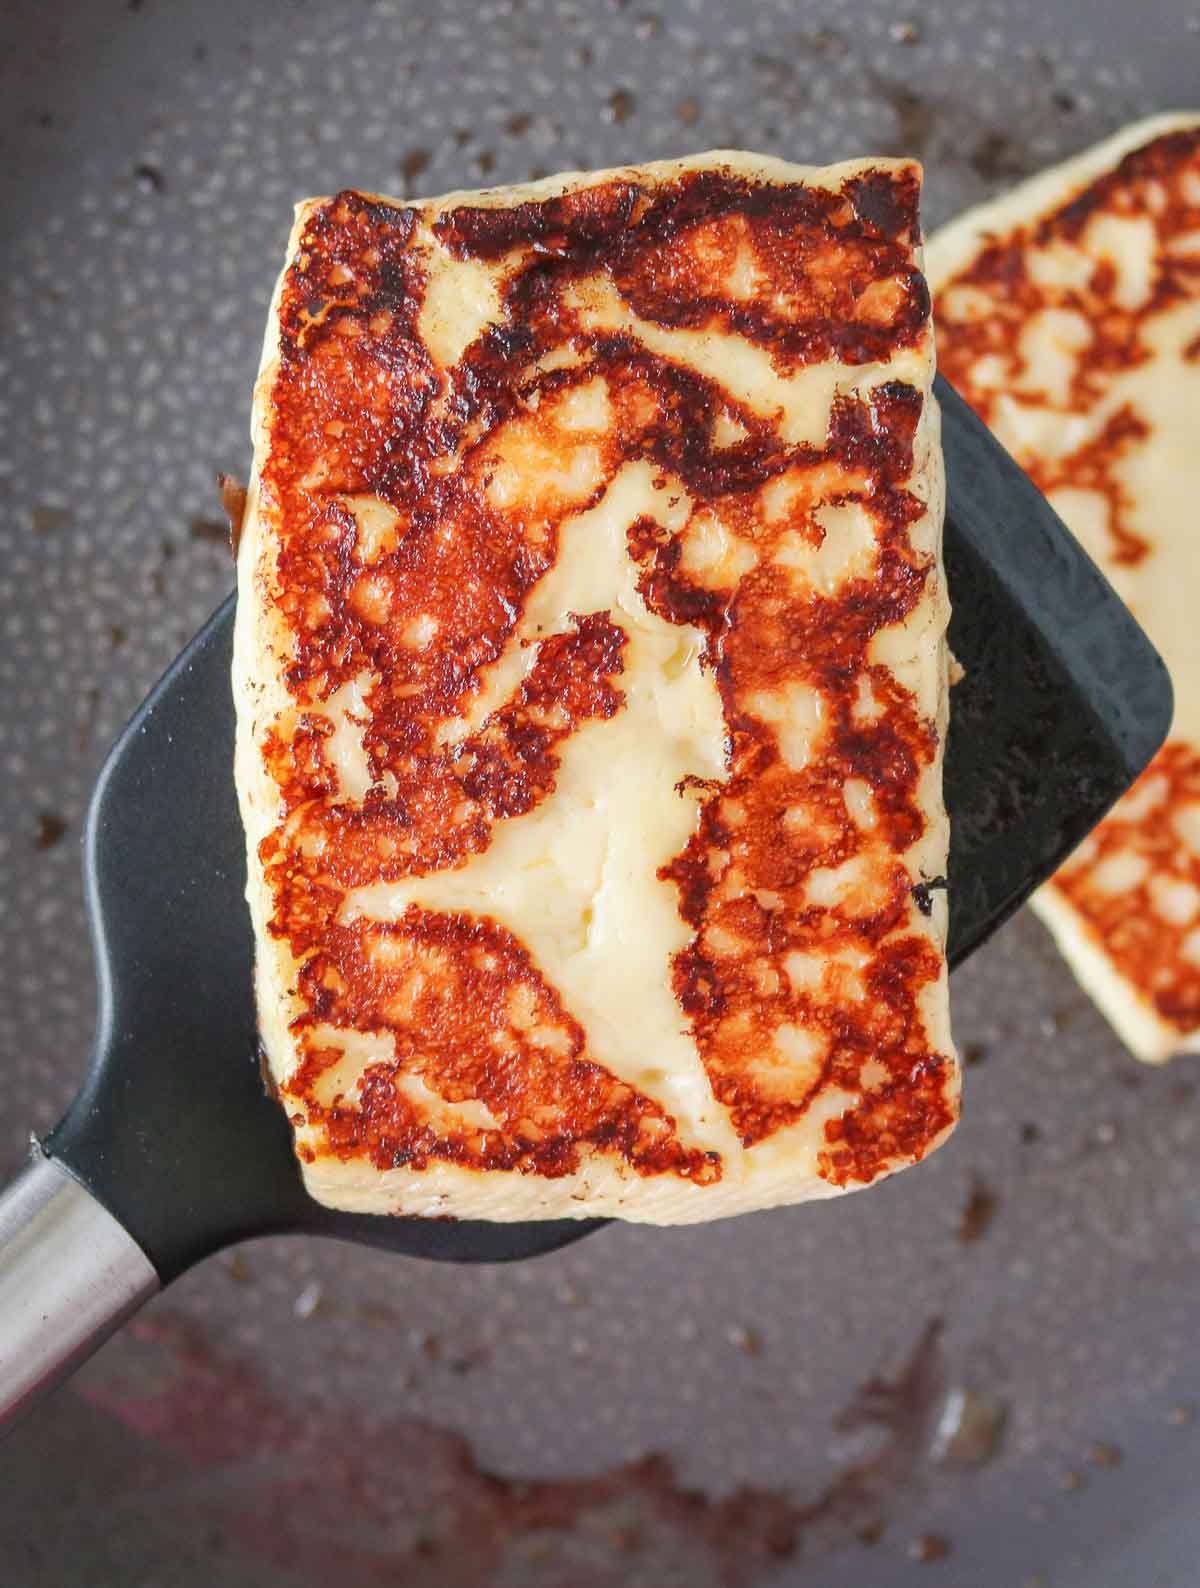 Spatula scooping up a portion of pan-fried halloumi cheese from a pan.